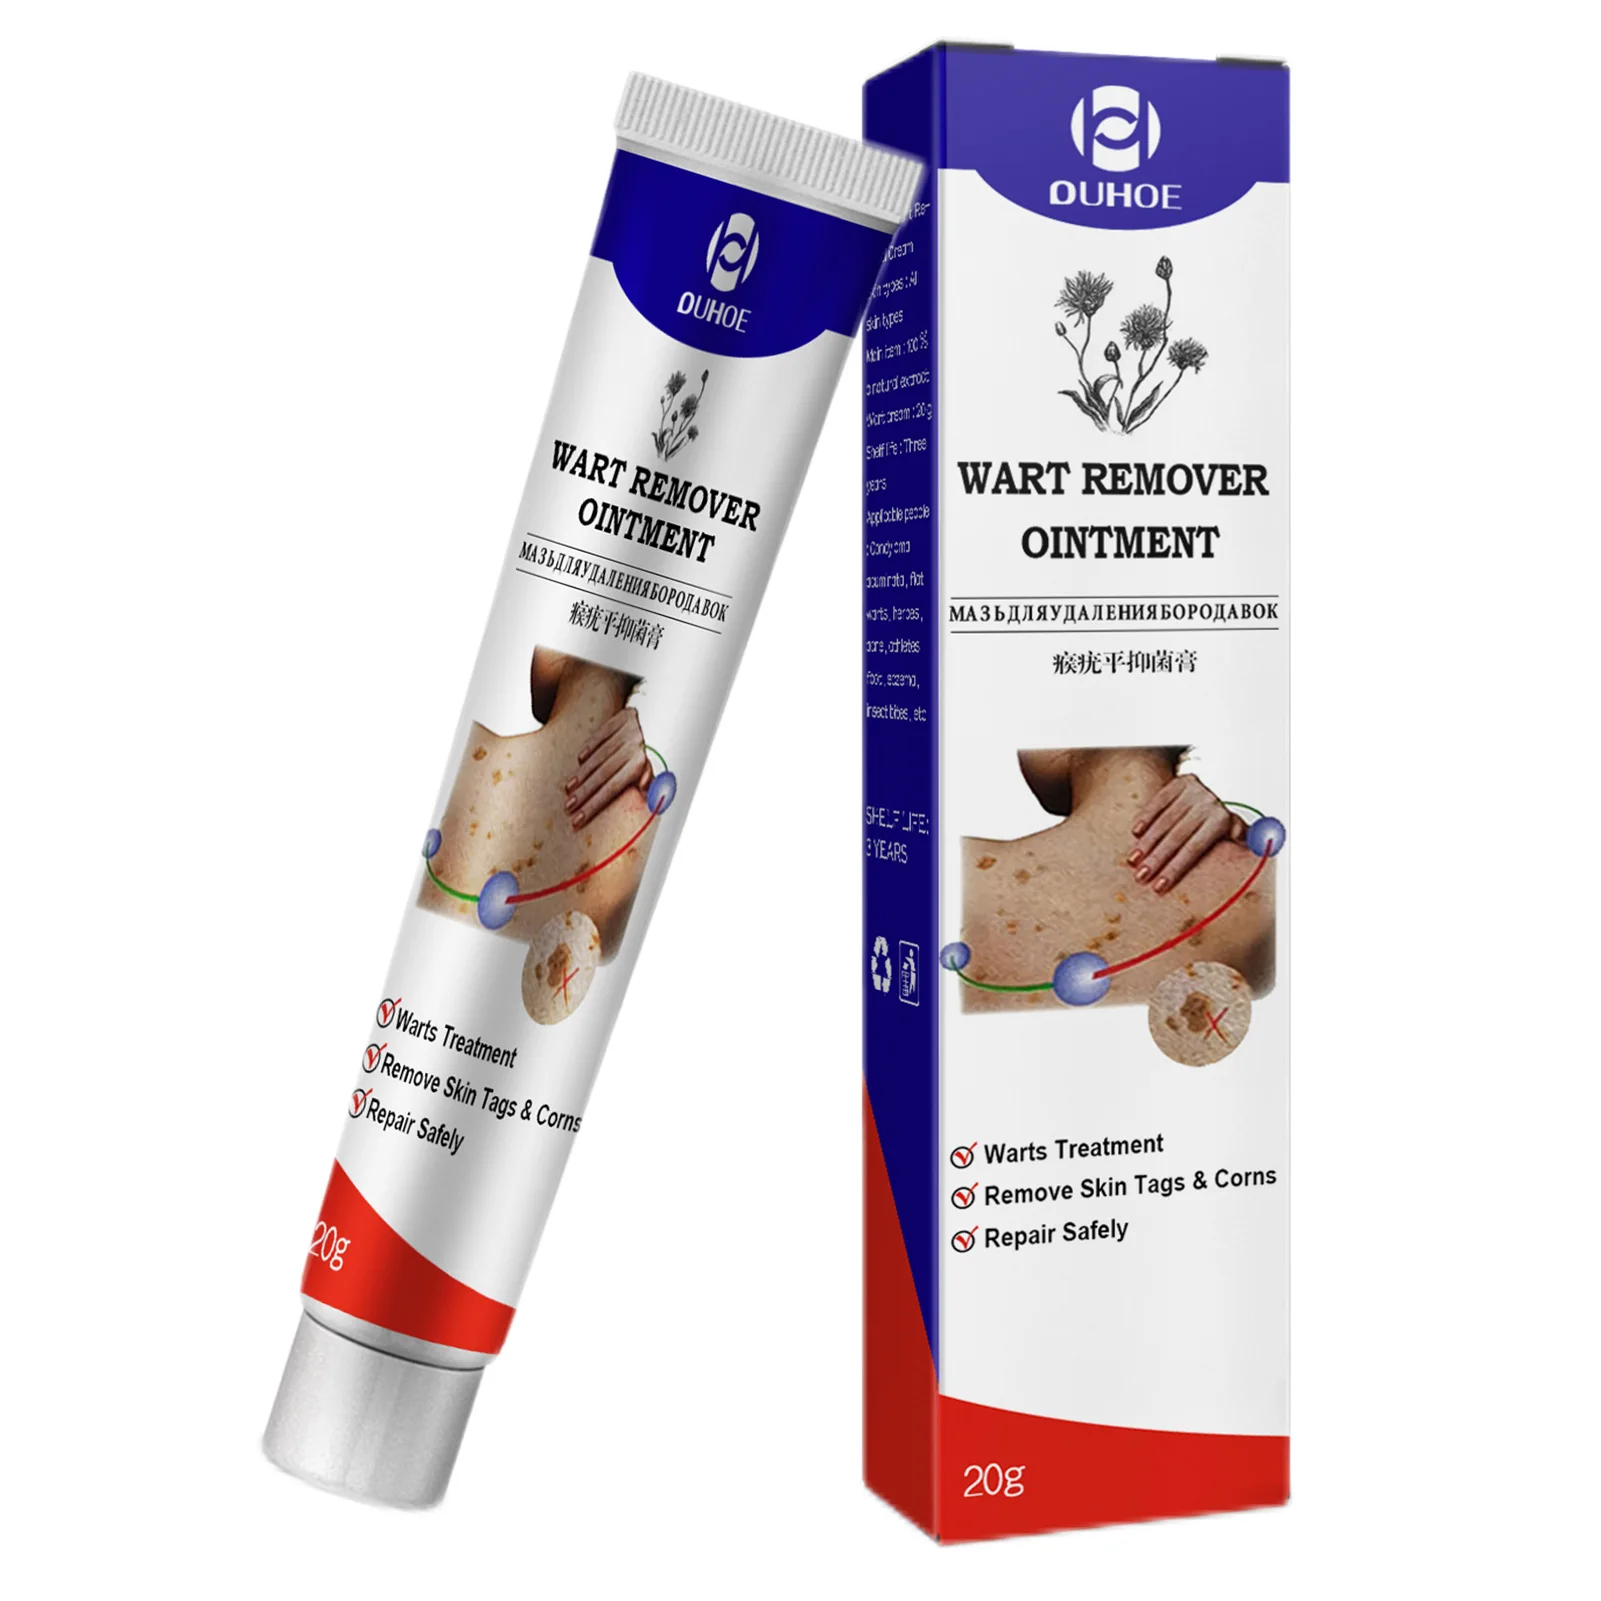 

20g Common Warts Remover Ointment Remedy Cream Foot Corn Removal Plantar Tag Removers Point Noir Skin Care Supplies Ointment